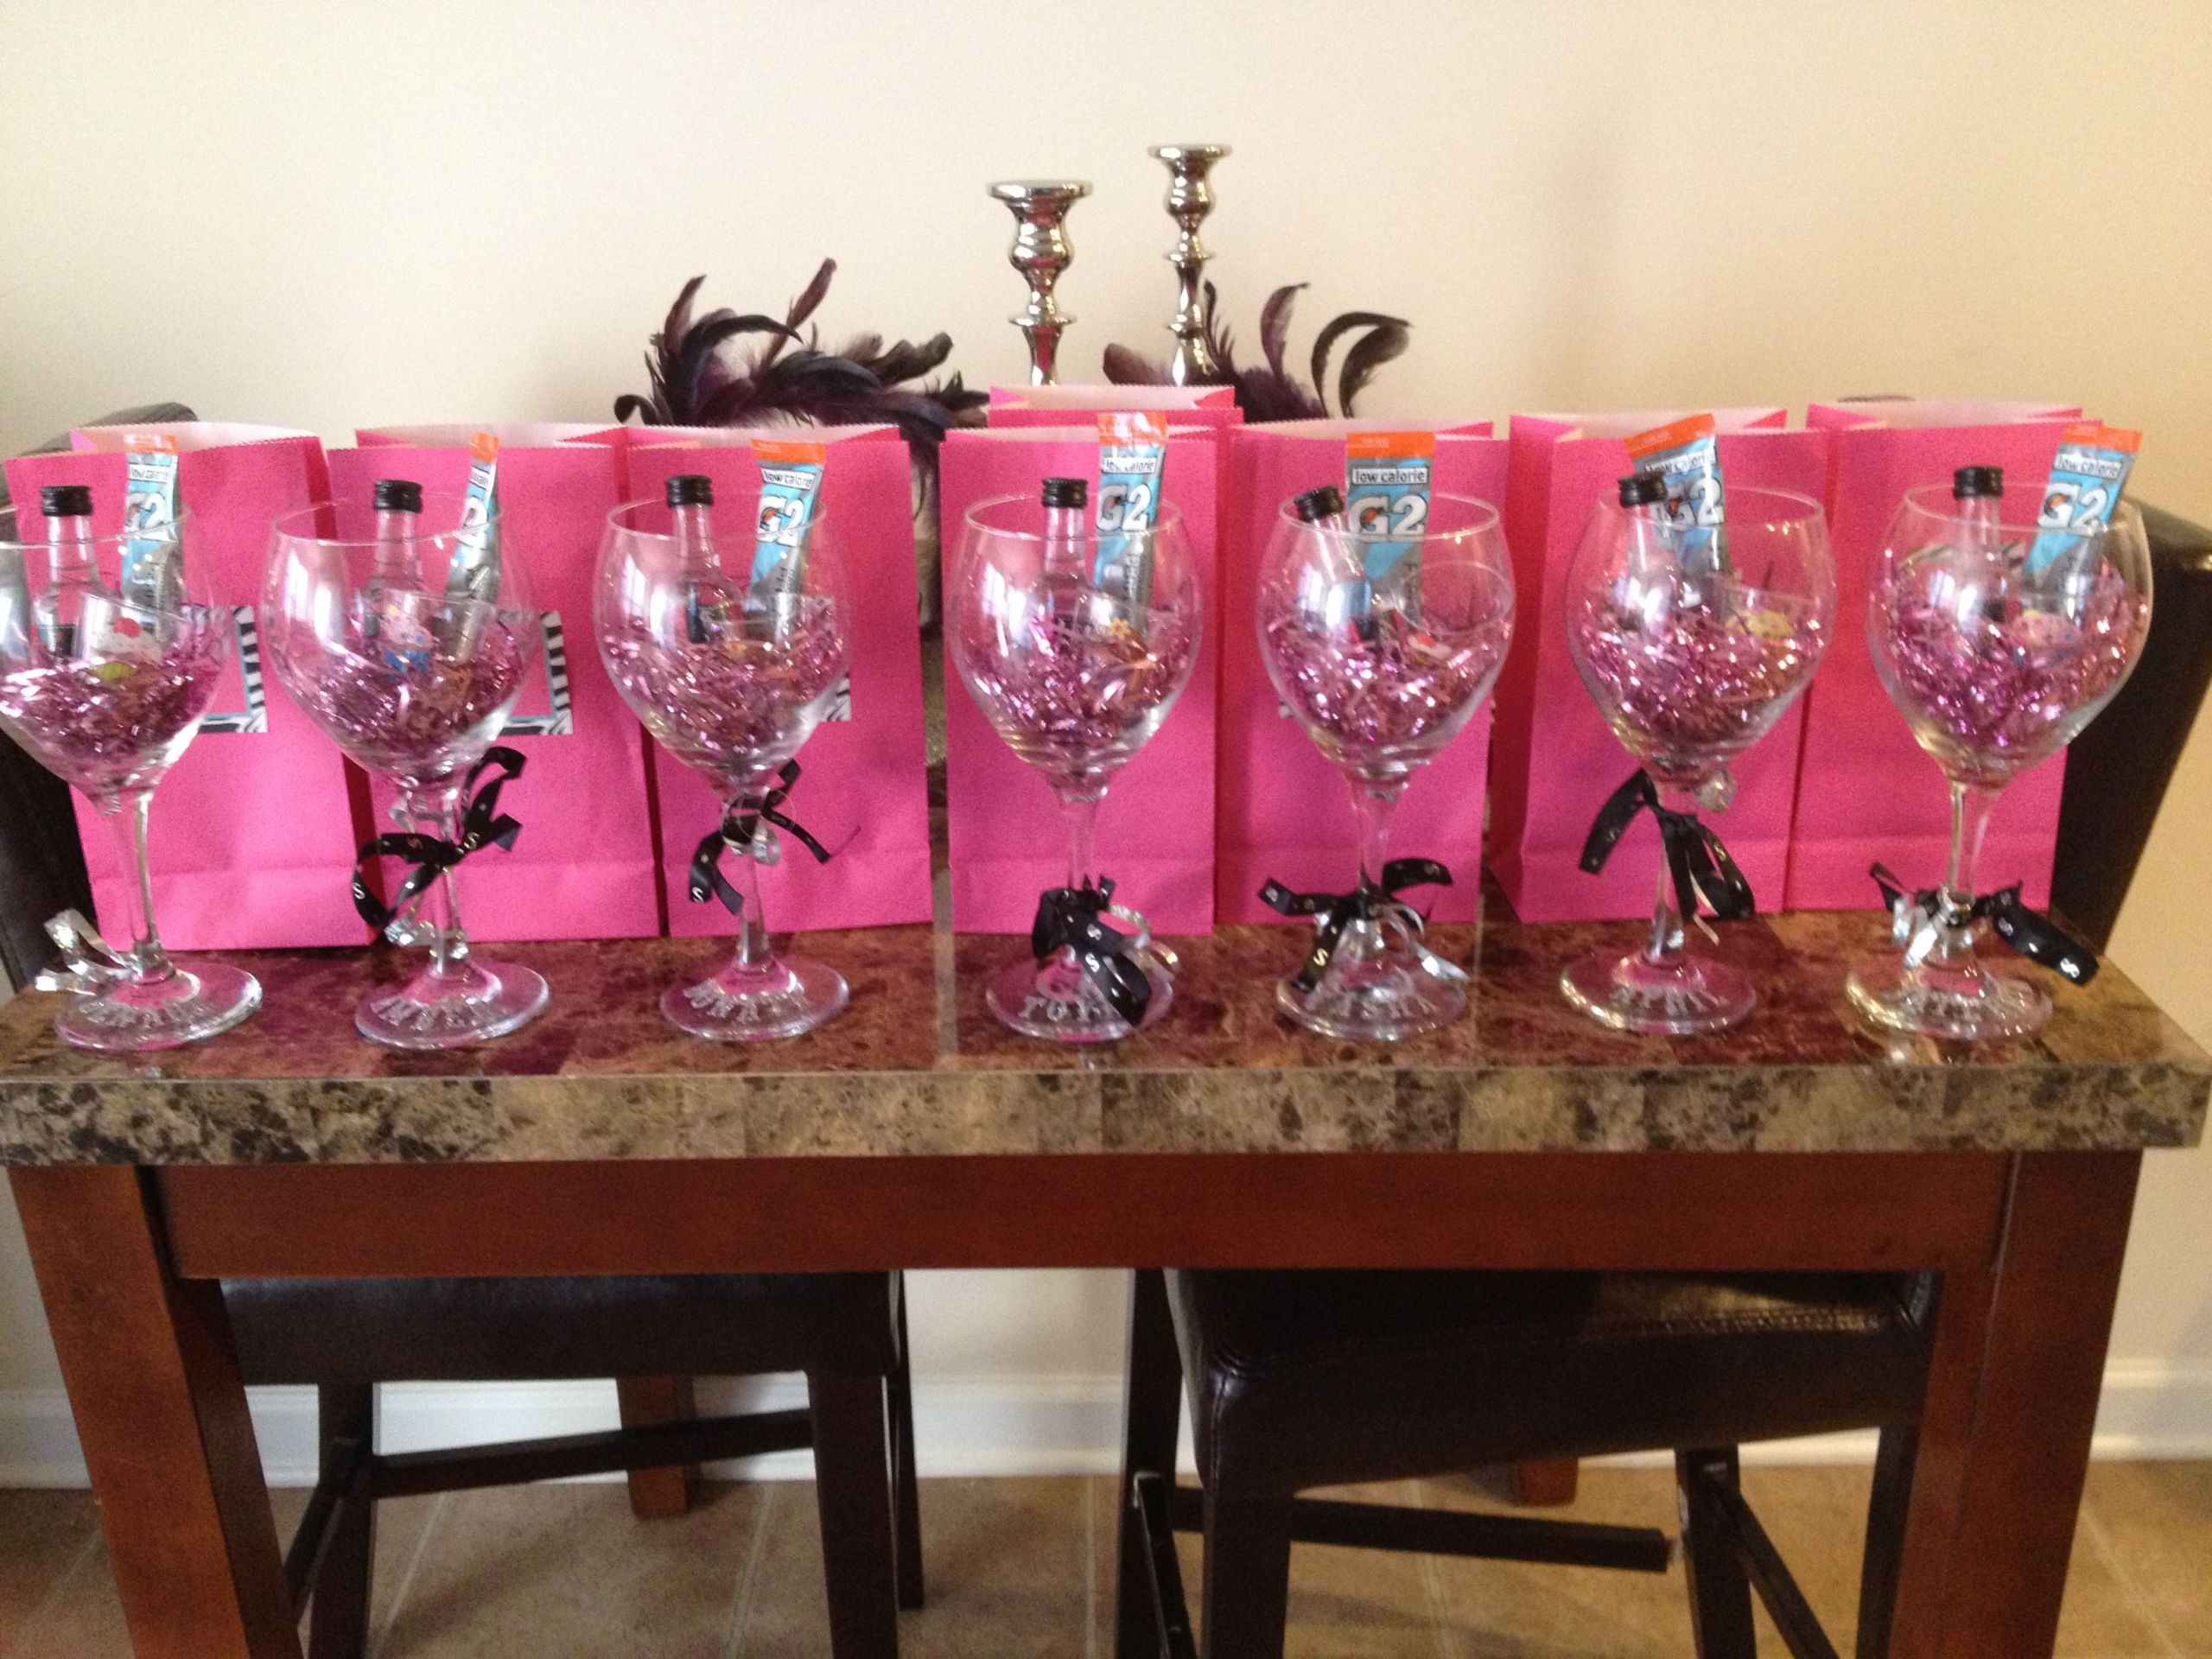 Gift Ideas For Girls Weekend
 Girls Trip Gifts A wine glass with shot bottles and a